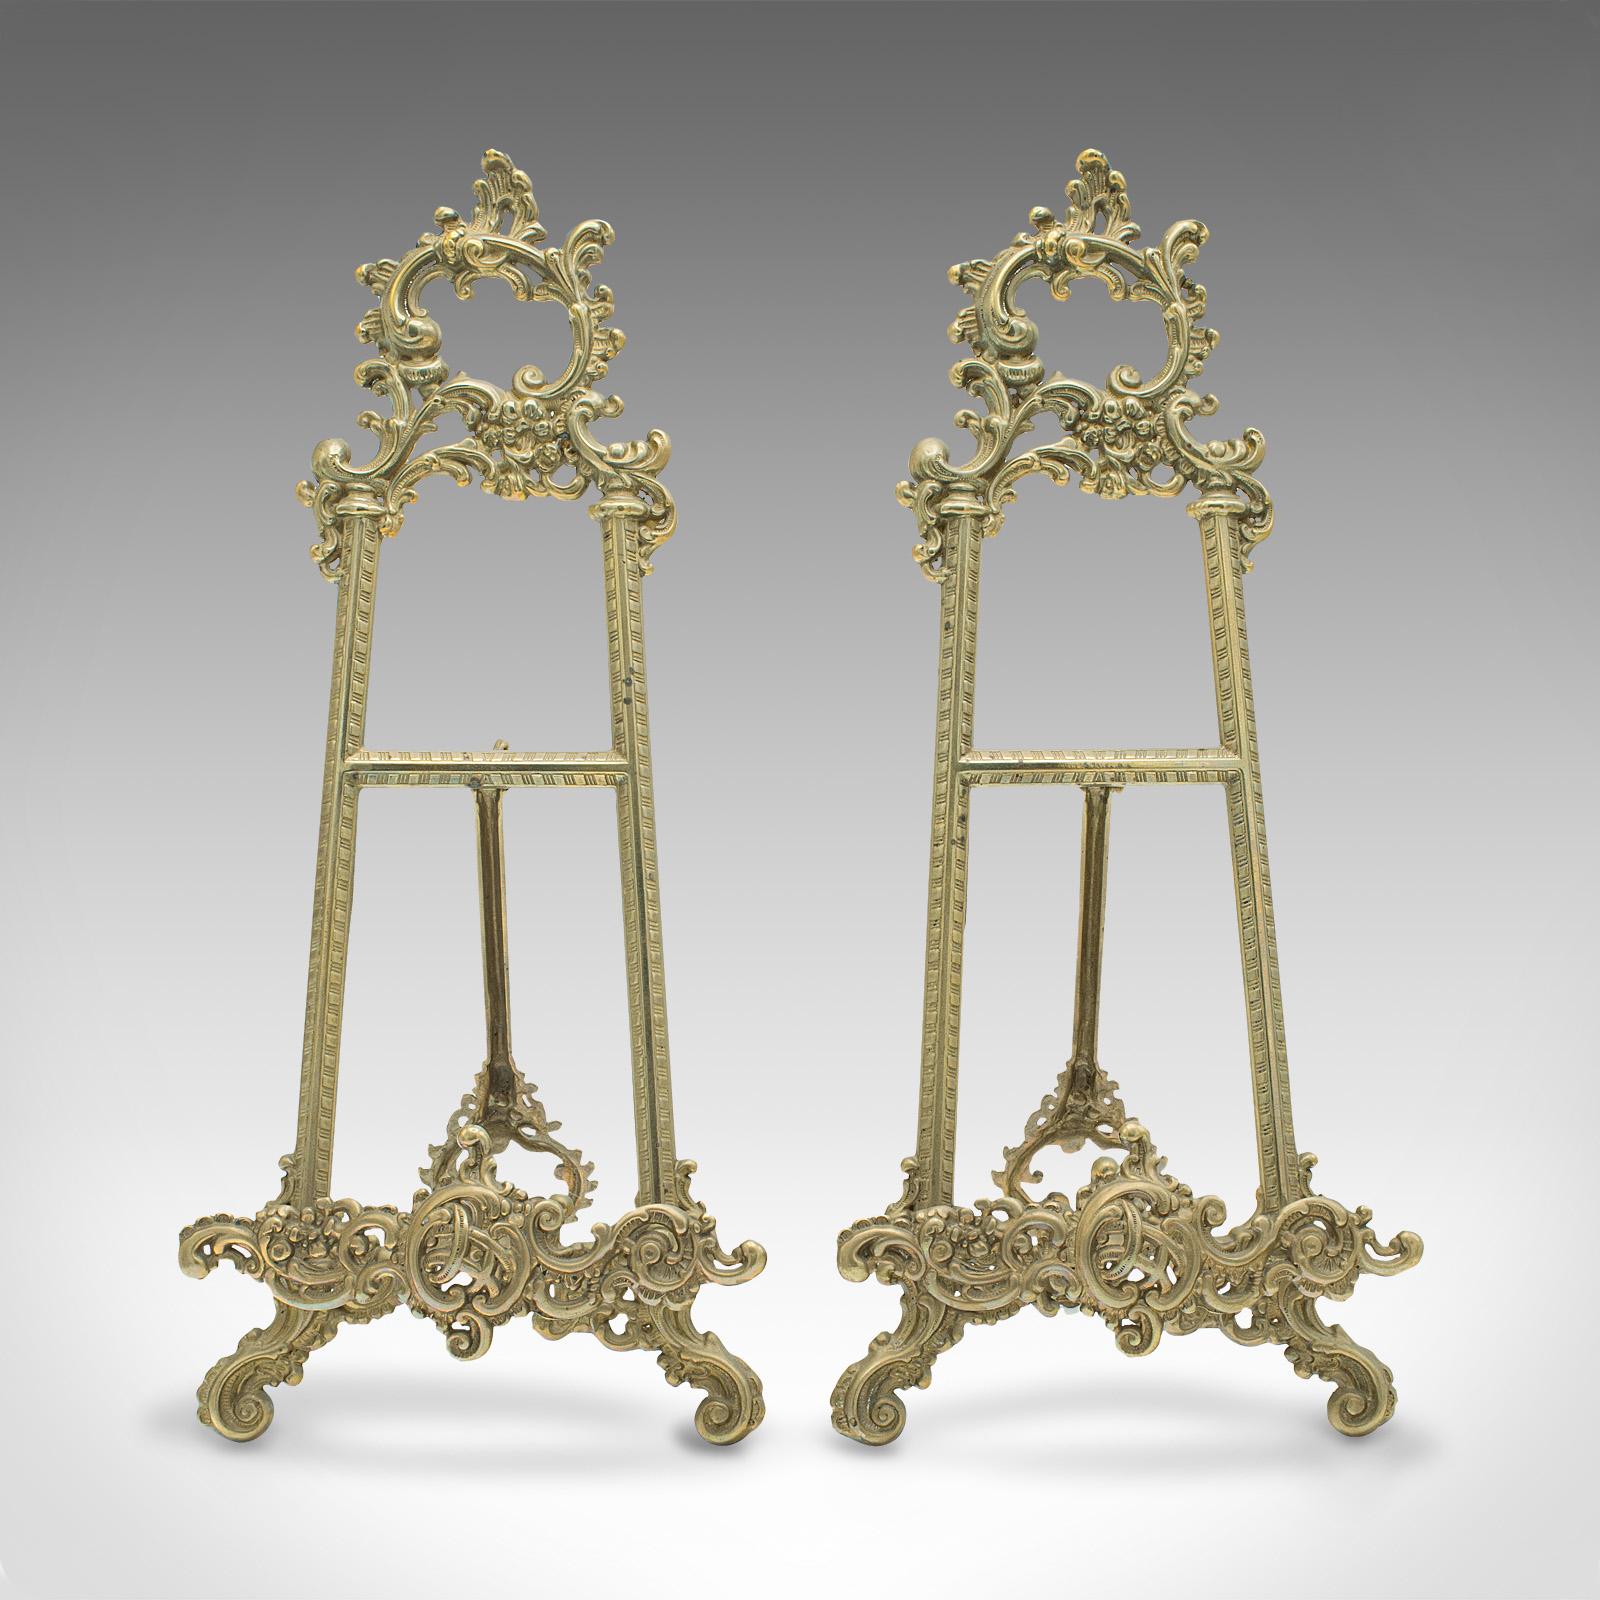 This is a pair of antique decorative picture stands. An English, brass book rest or artist's easel in Art Nouveau taste, dating to the early 20th century, circa 1920.

Versatile and appealing as a pair of stands
Displaying a desirable aged patina